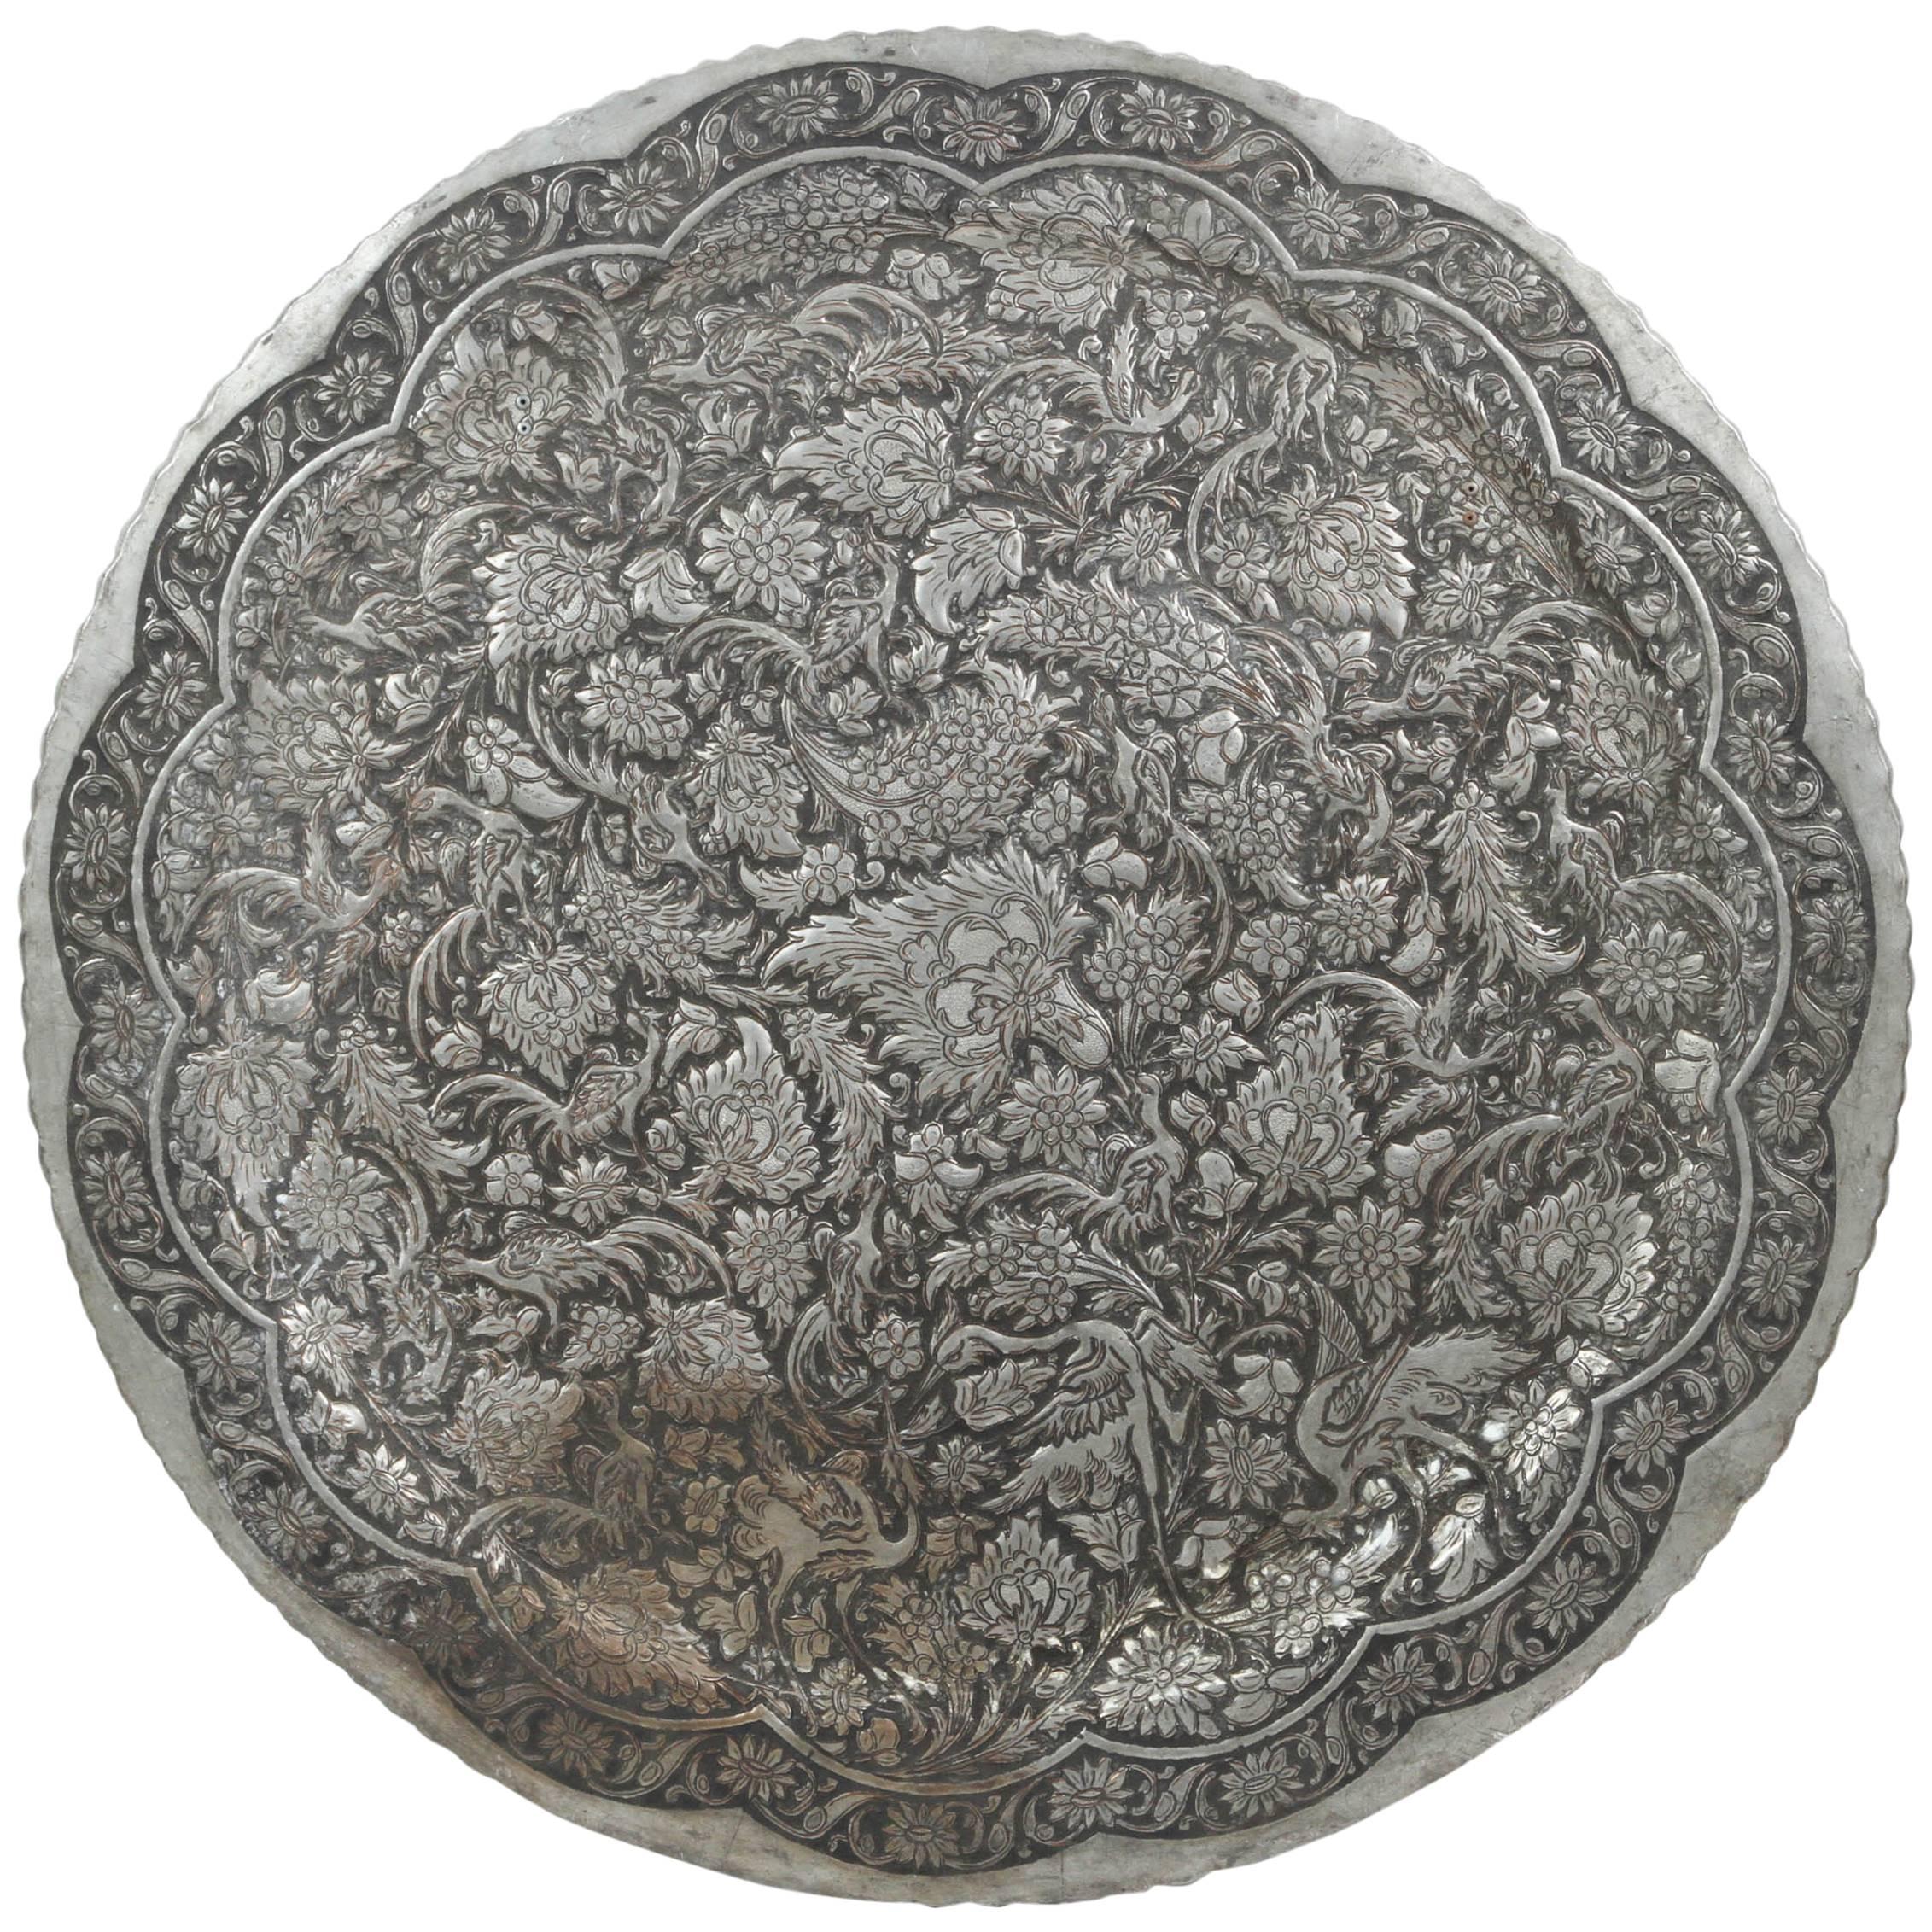 Antique Persian Silvered Wall Tray